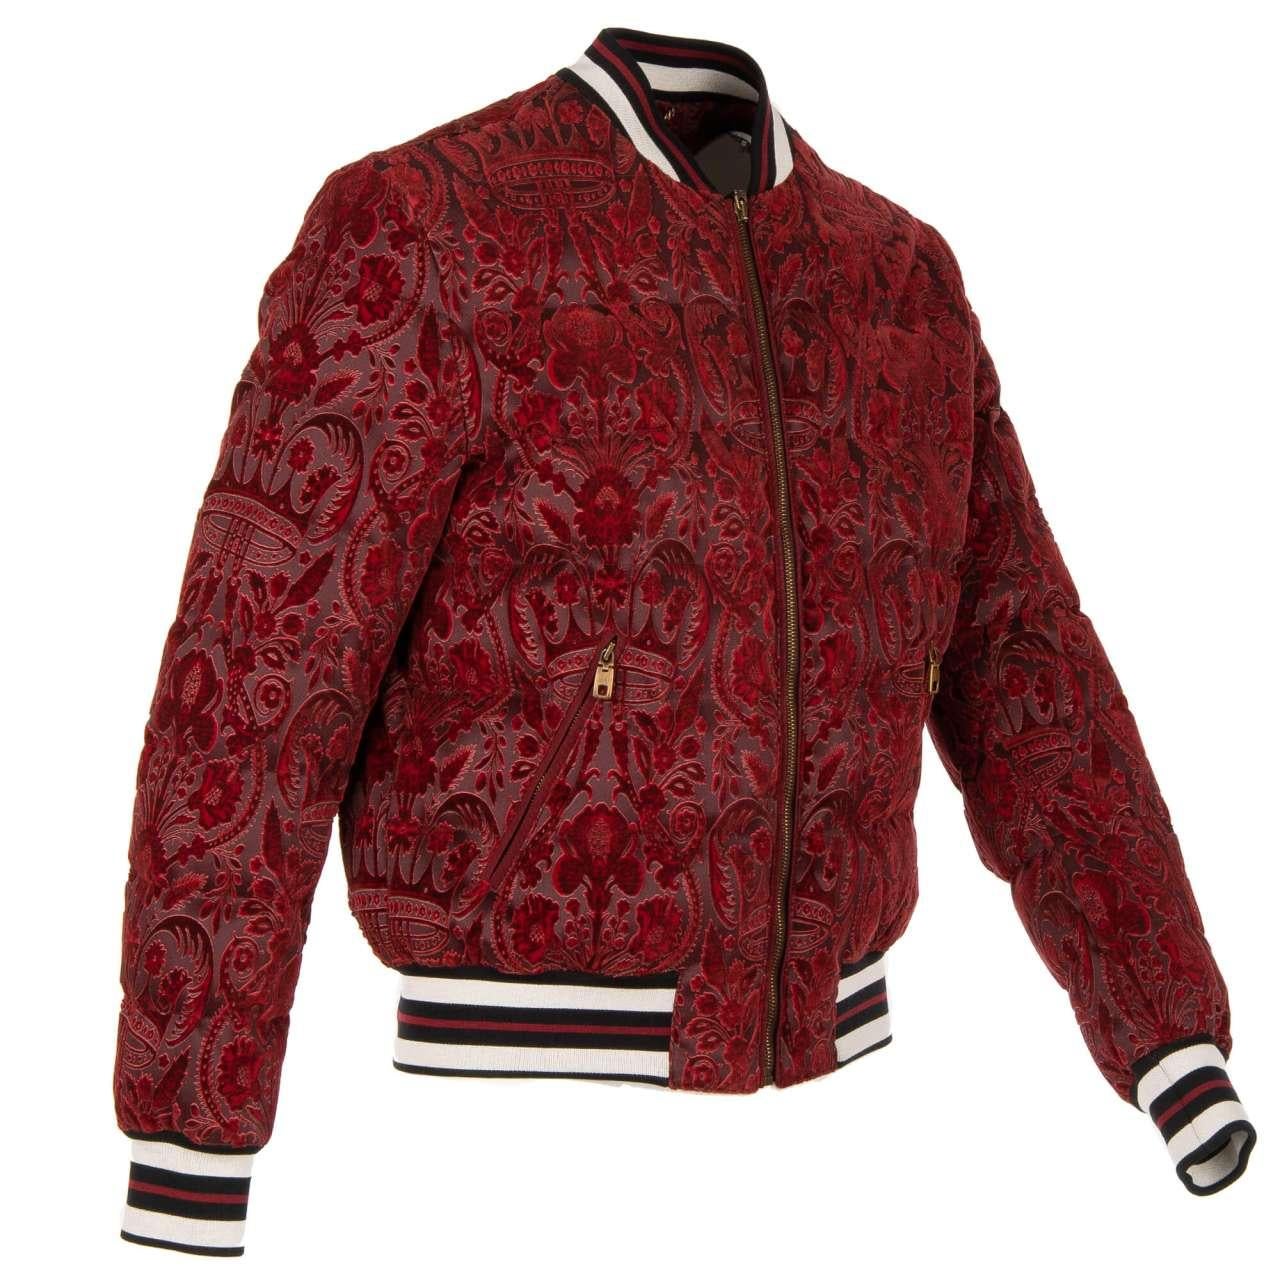 Dolce & Gabbana Down Bomber Jacket with Baroque Brocade Crowns Red 48 In Excellent Condition For Sale In Erkrath, DE